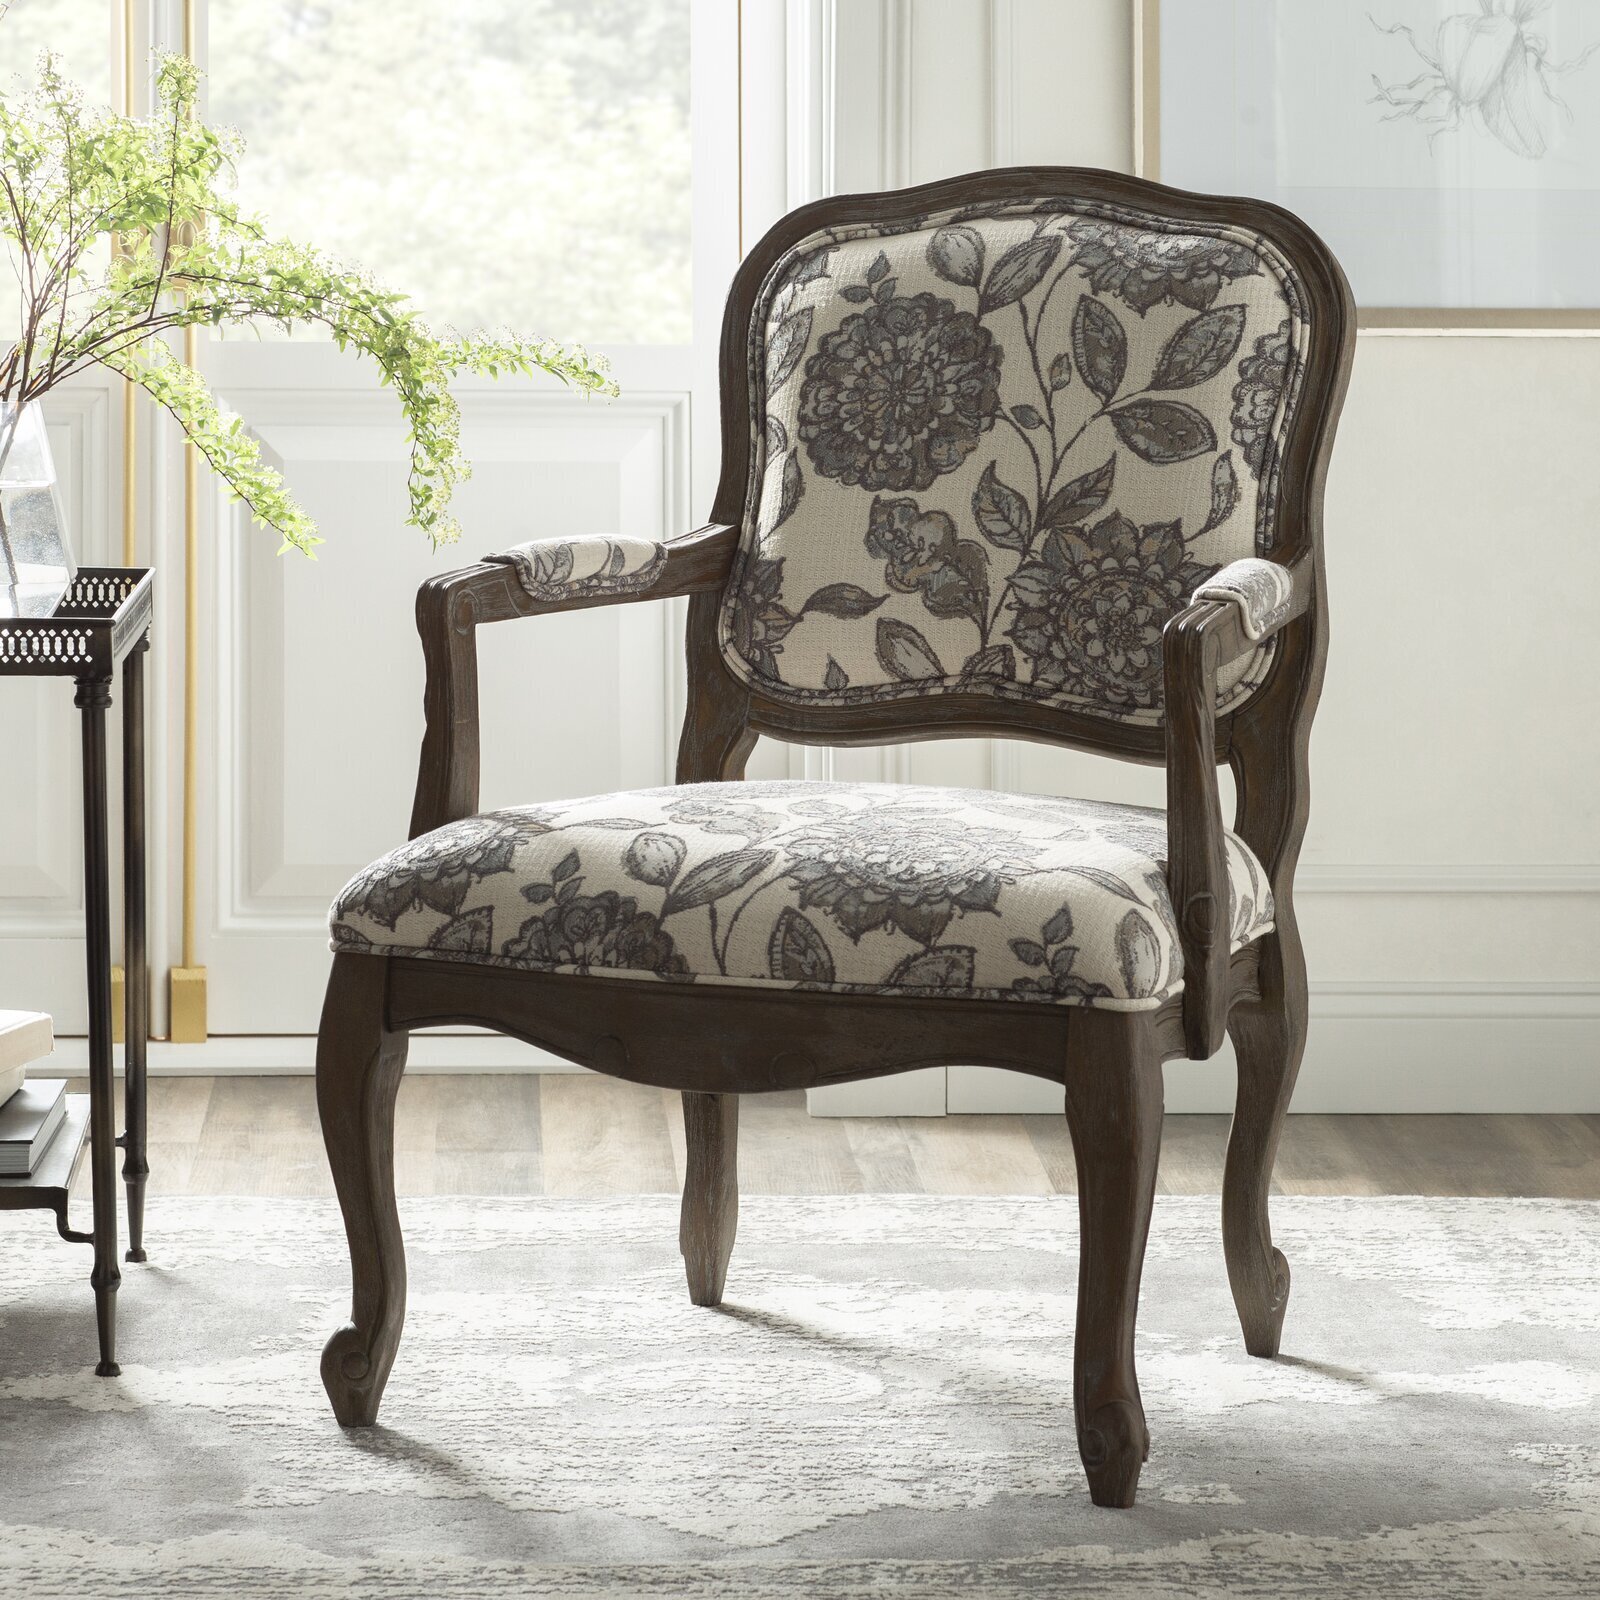 Patterned Louis XV Chair Antique 